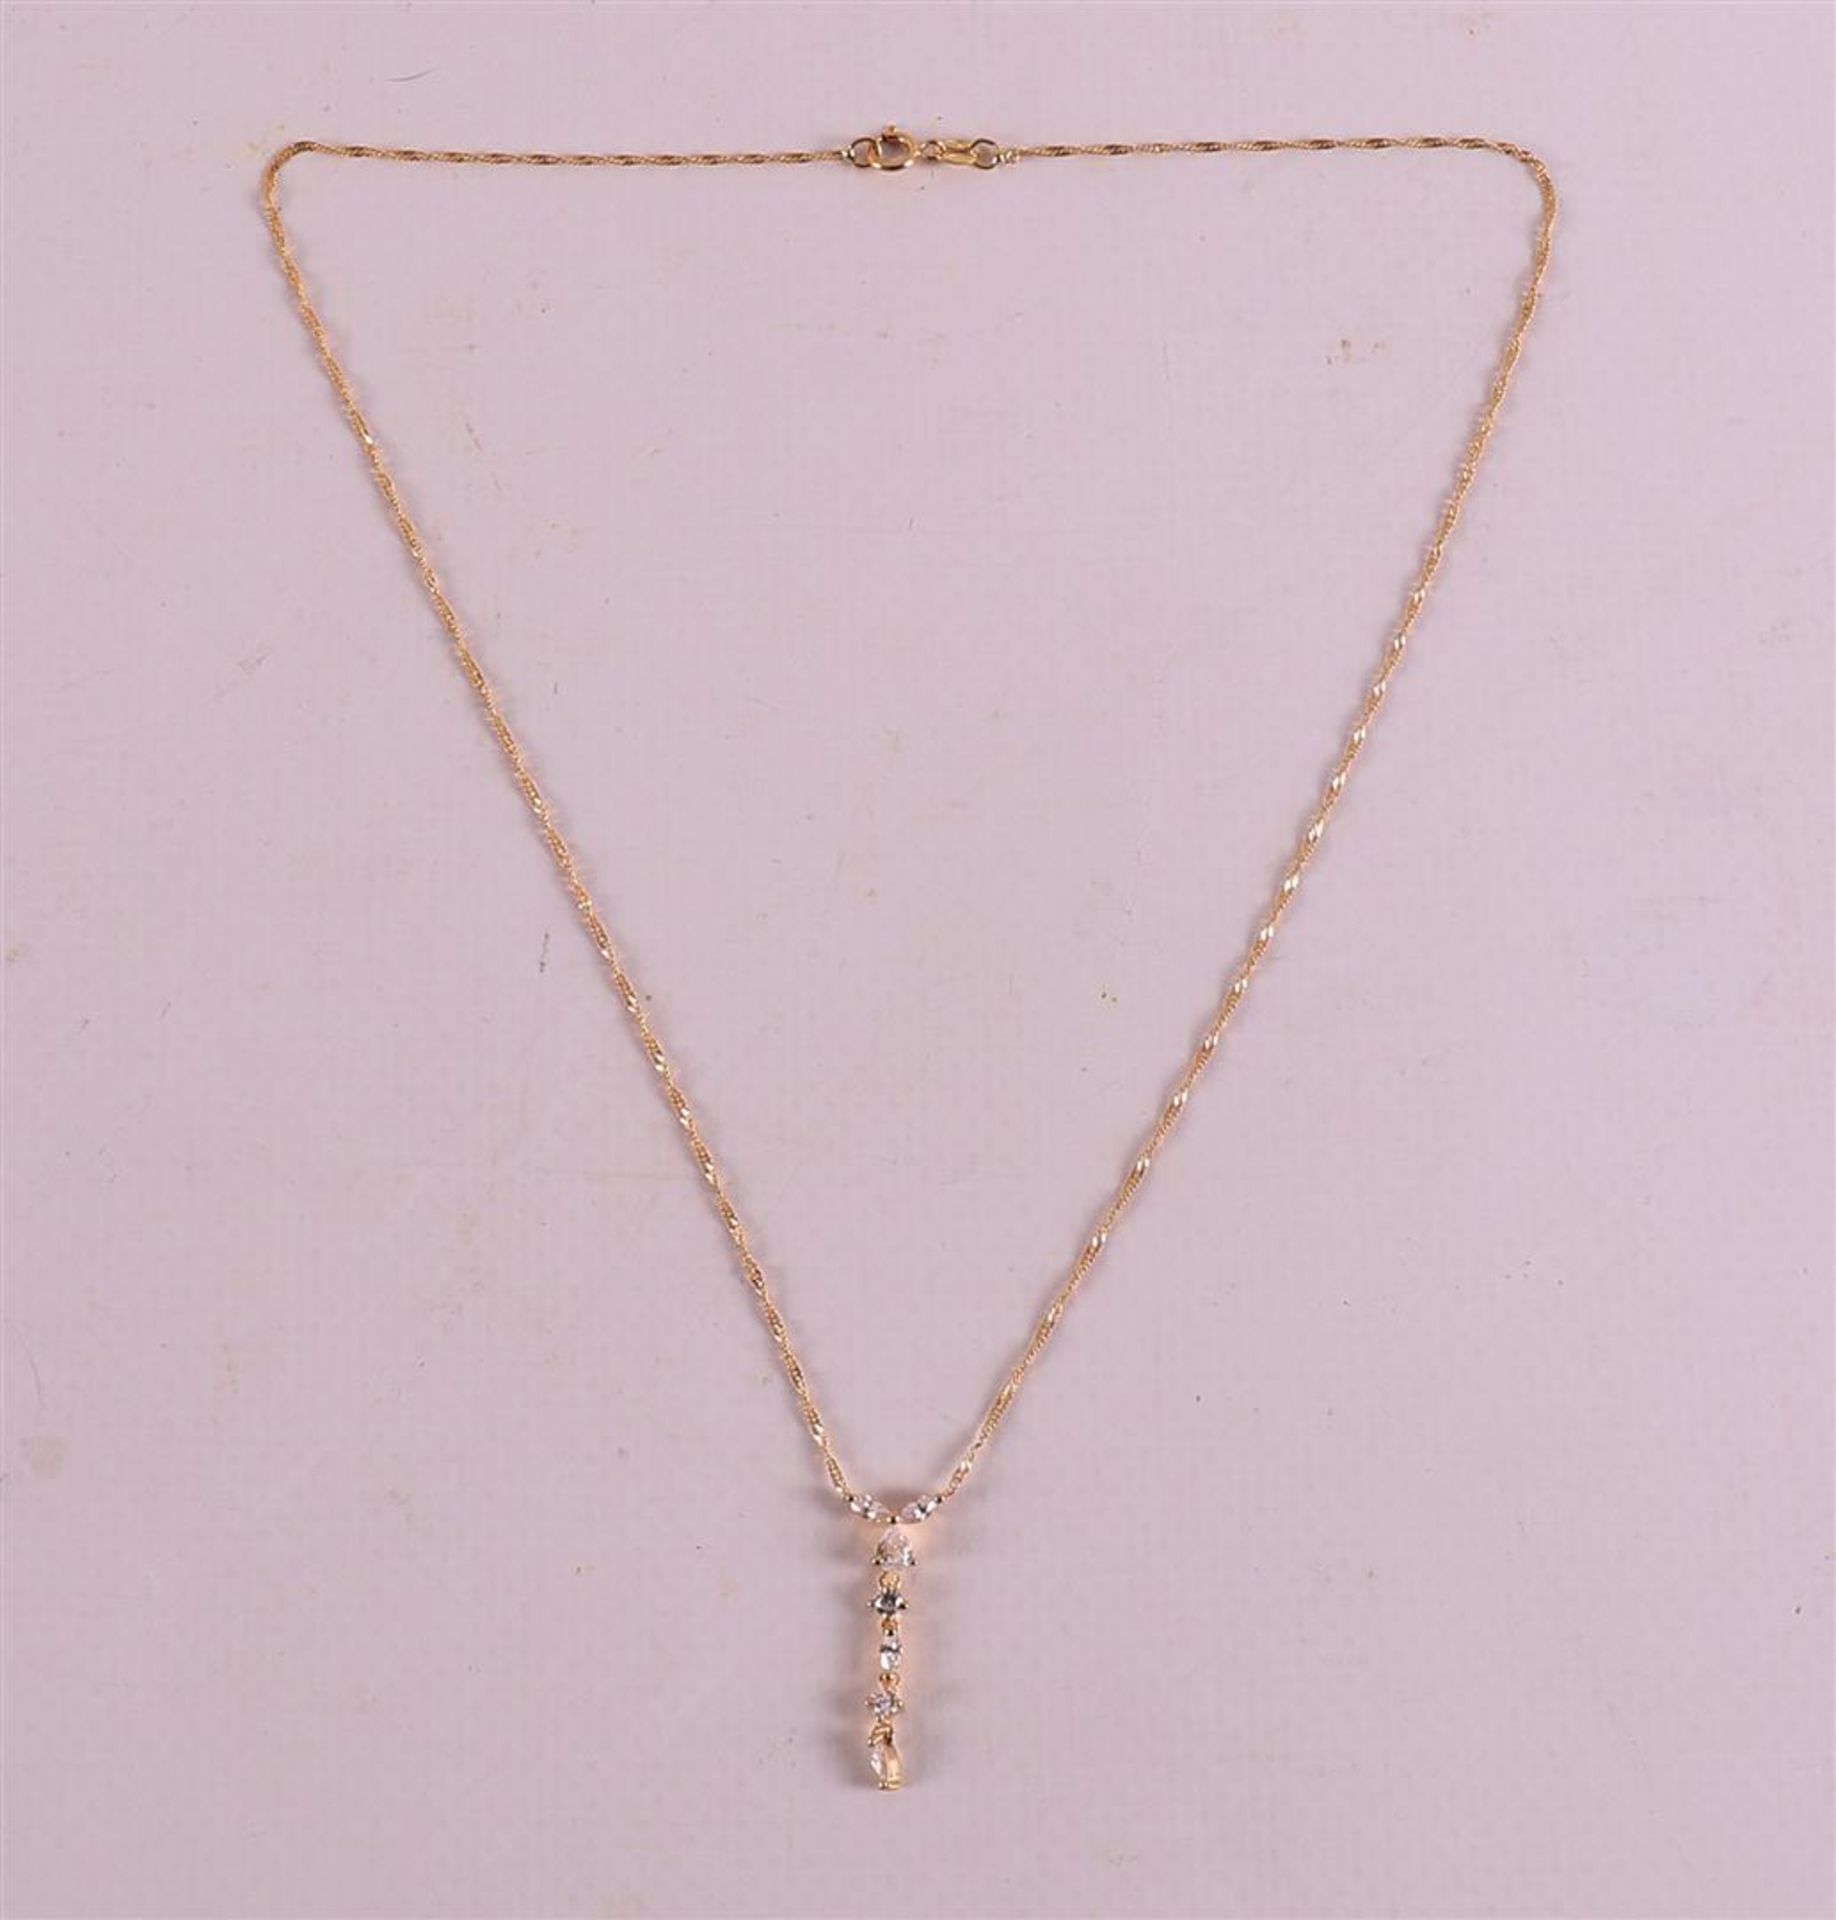 An 18 kt 750/1000 gold necklace with zirconias.